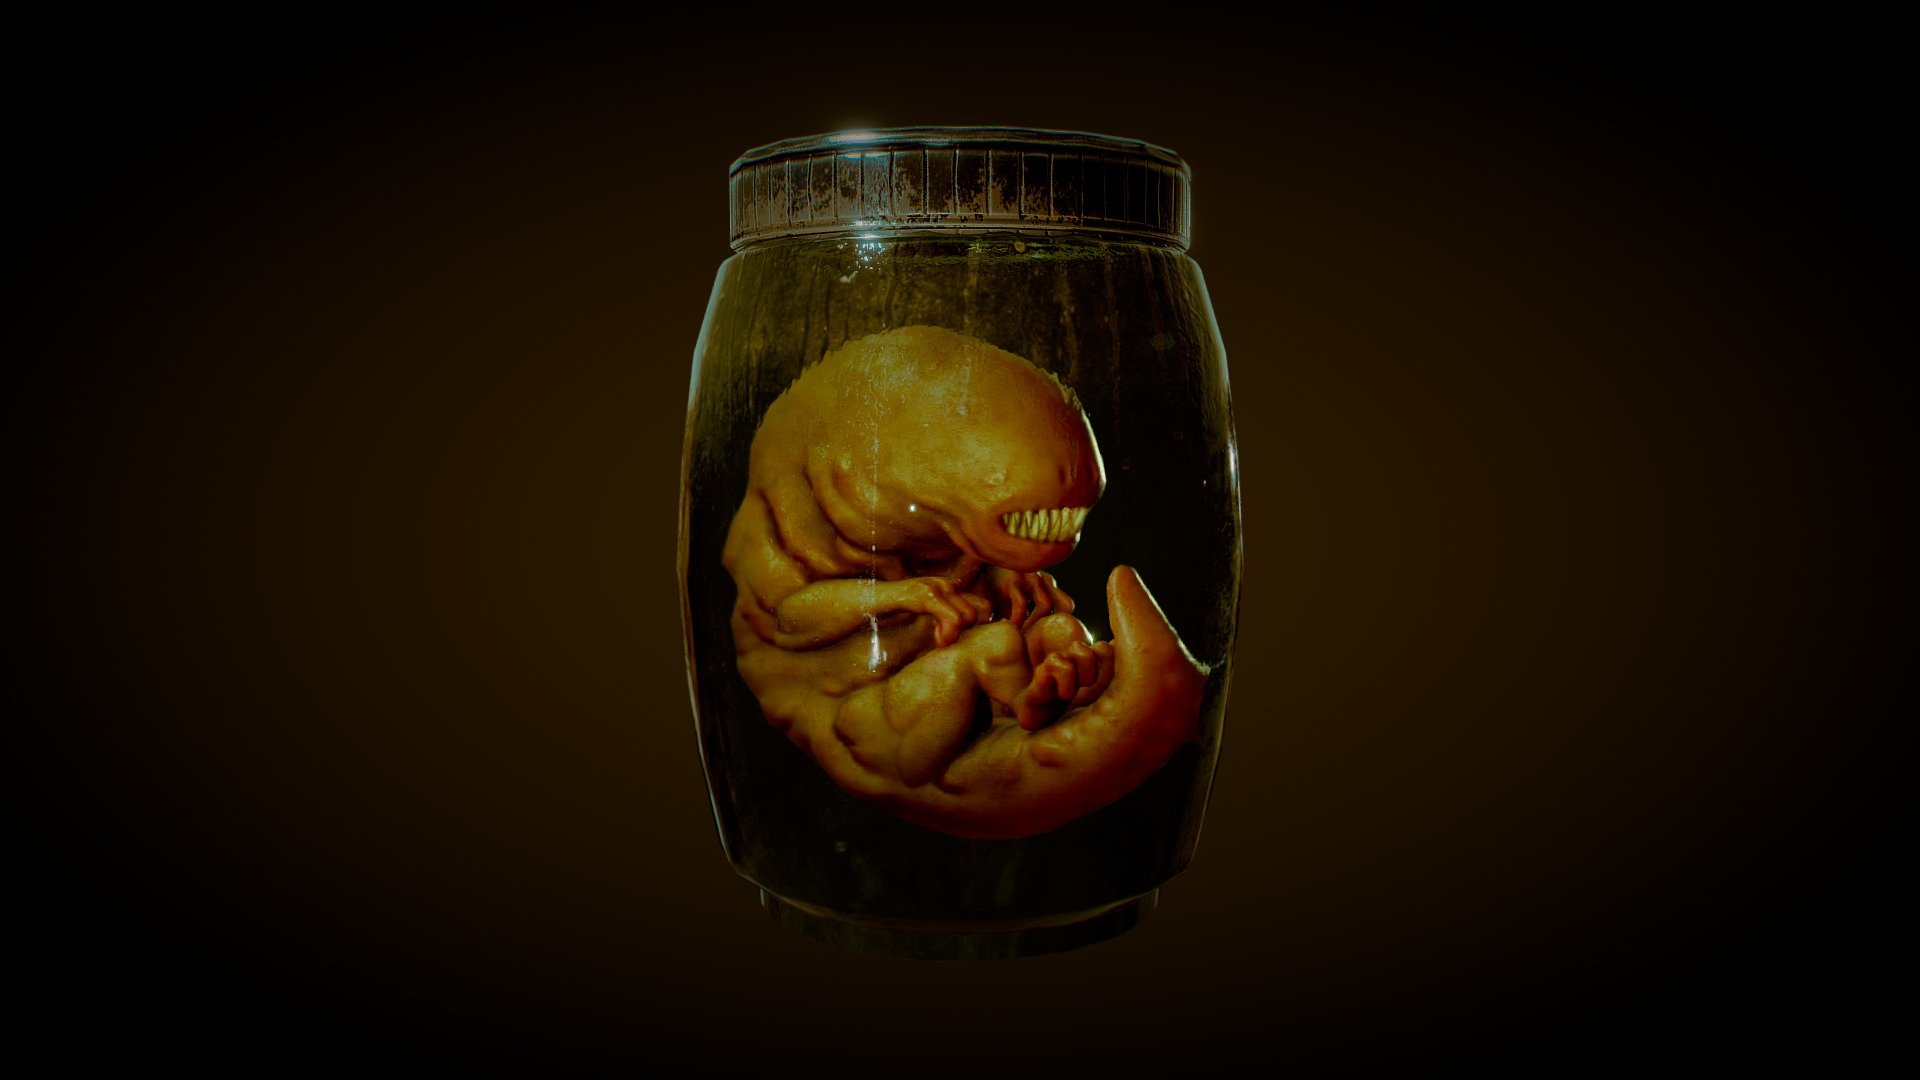 Based on various Alien embryo references. A model that I sculpted in Zbrush and  retopologized in Maya. Textured using Substance Painter.
I hope you like it!

*The RAR includes ZTool, FBX, and texture files for Embryo and Flask - Alien Embryo - Buy Royalty Free 3D model by leaggon 3d model